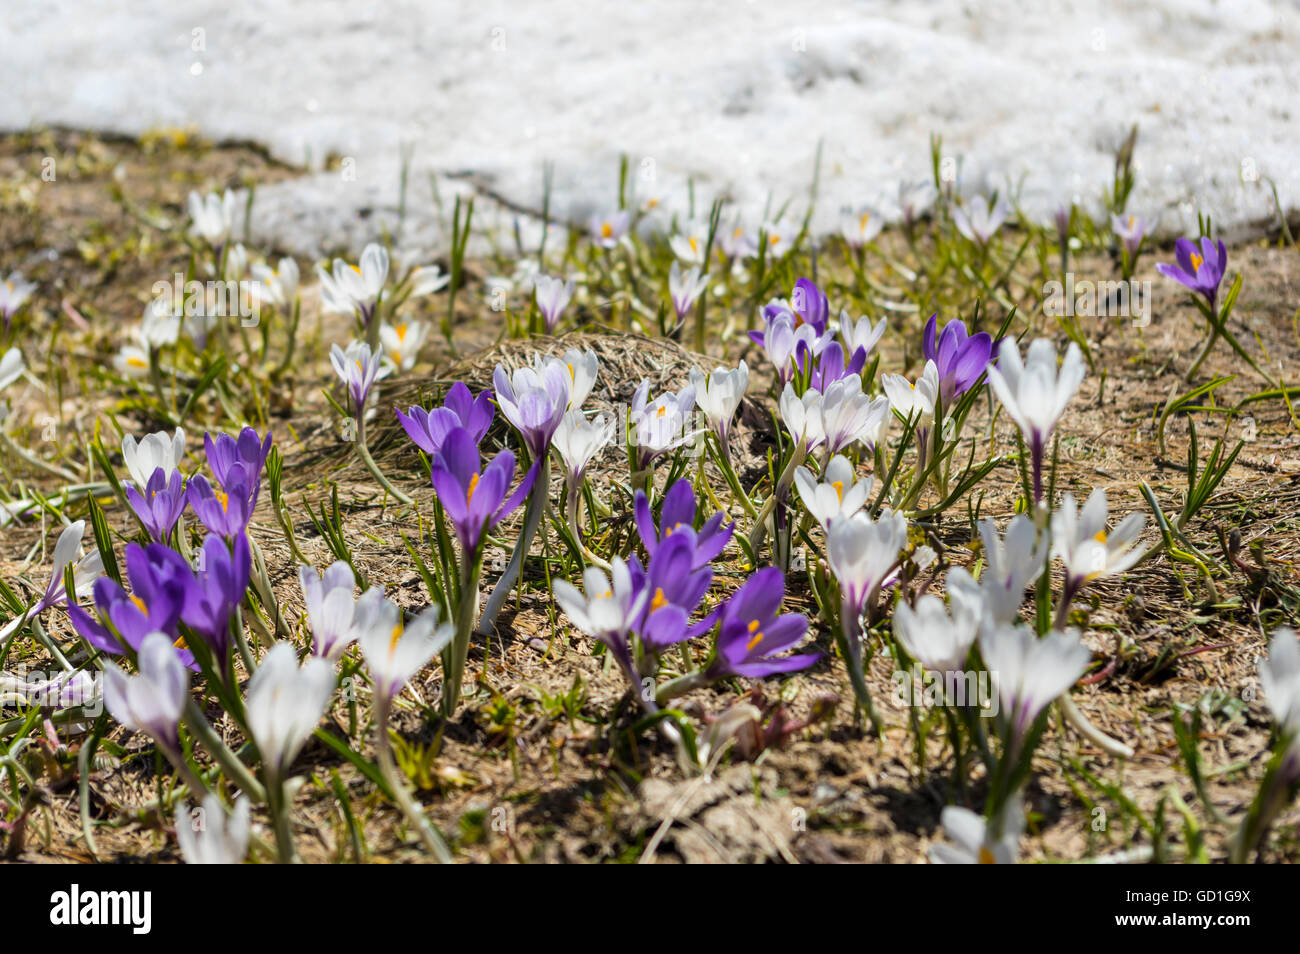 Alpine spring crocus (crocus vernus albiflorus) flowers in white and violet in front of a patch of snow. Stock Photo